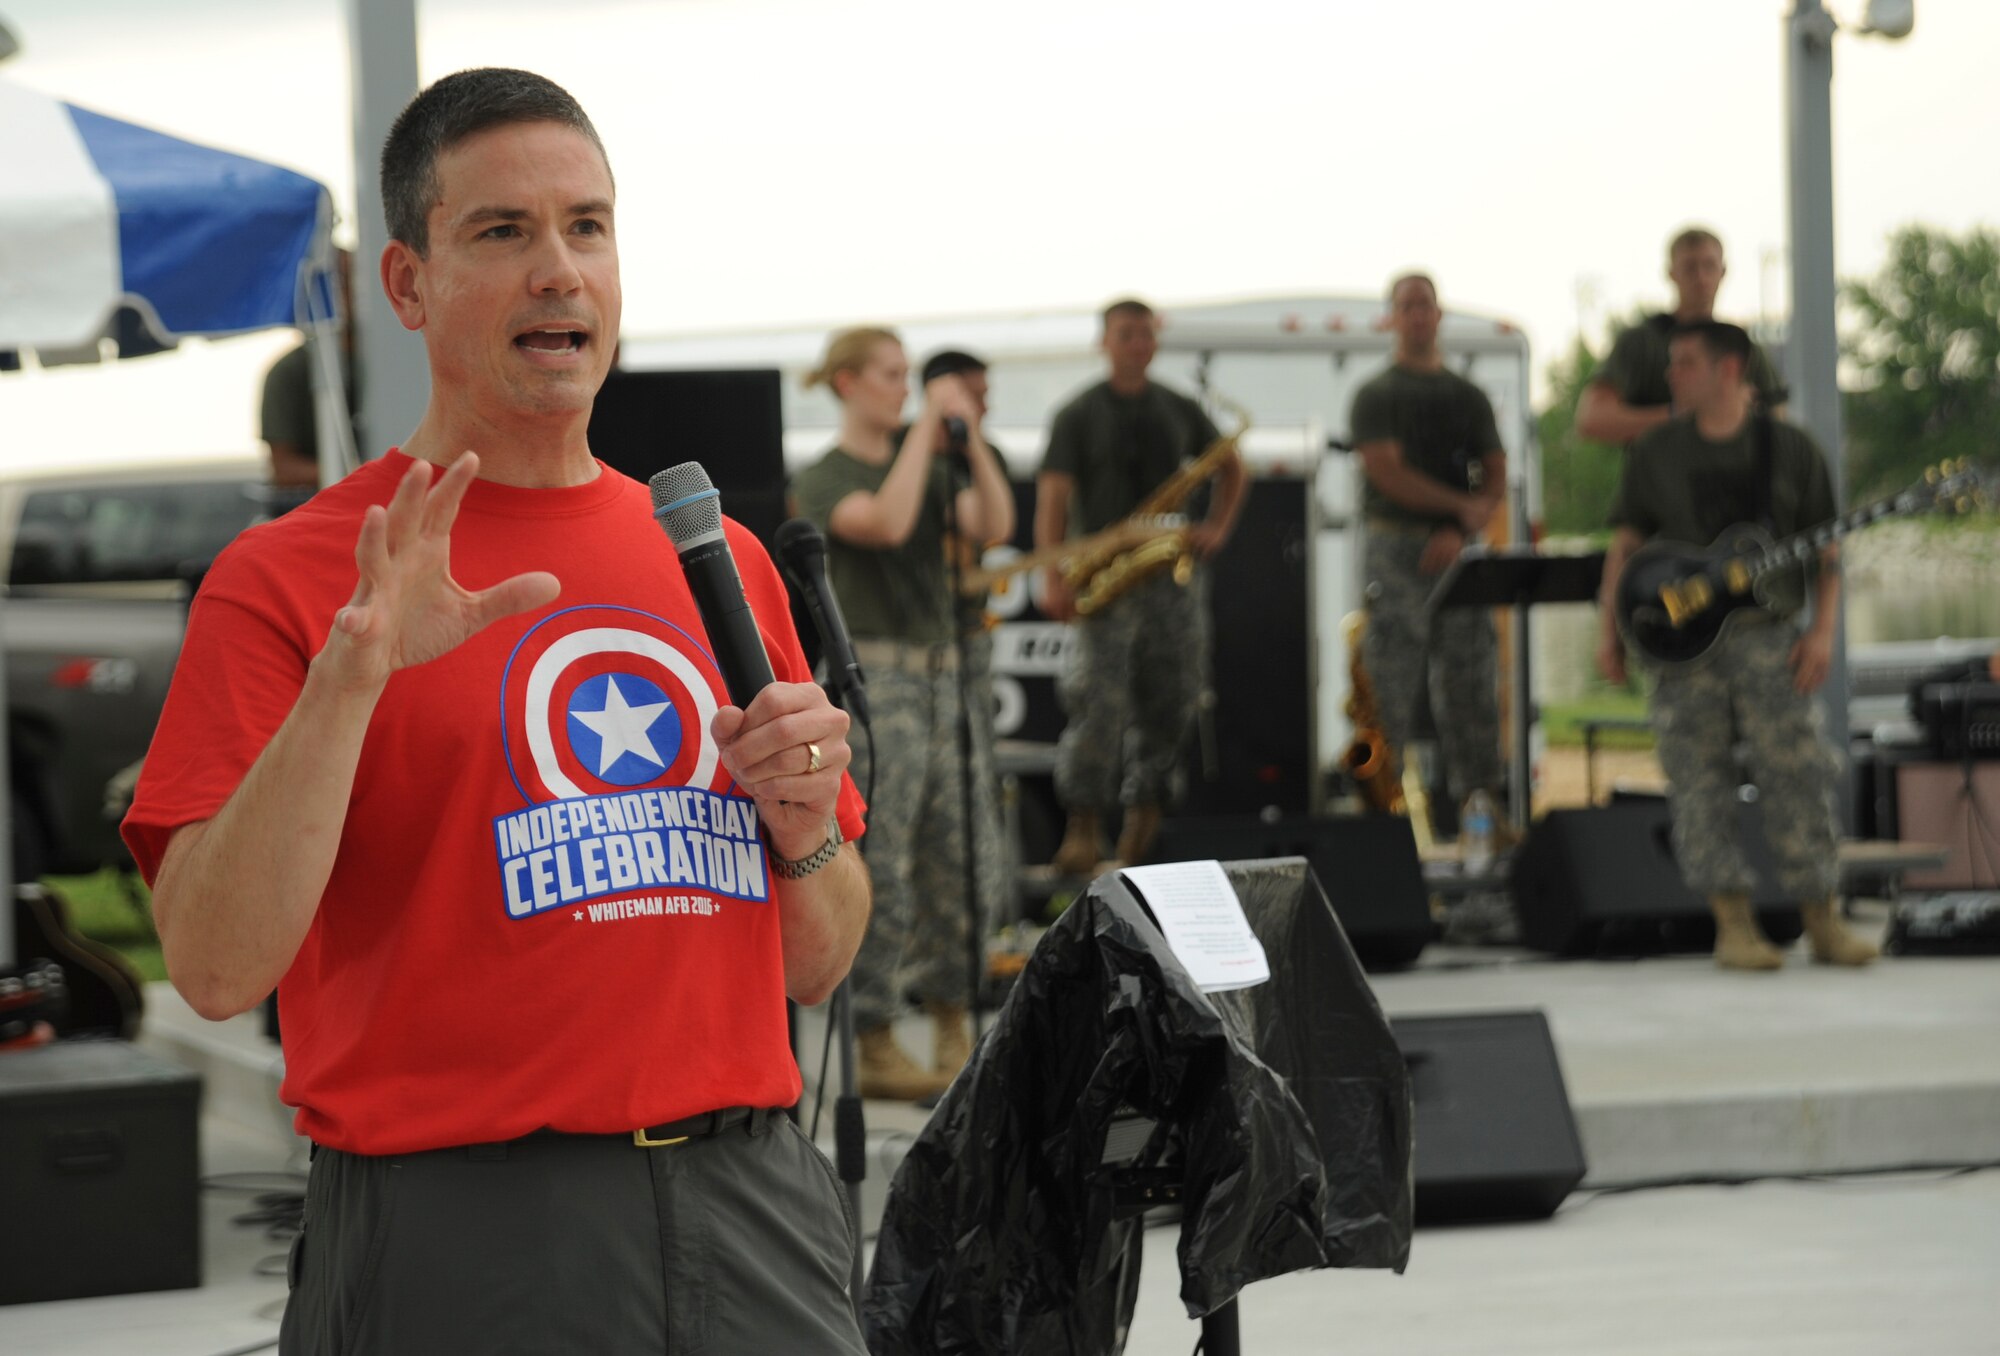 U.S. Air Force Brig. Gen. Paul W. Tibbets IV, the 509th Bomb Wing commander, gives opening remarks during the Independence Day Celebration at Whiteman Air Force Base, Mo., June 30, 2016. A performance by the Missouri National Guard’s 135th Army Band followed the opening remarks. (U.S. Air Force photo by Senior Airman Danielle Quilla)